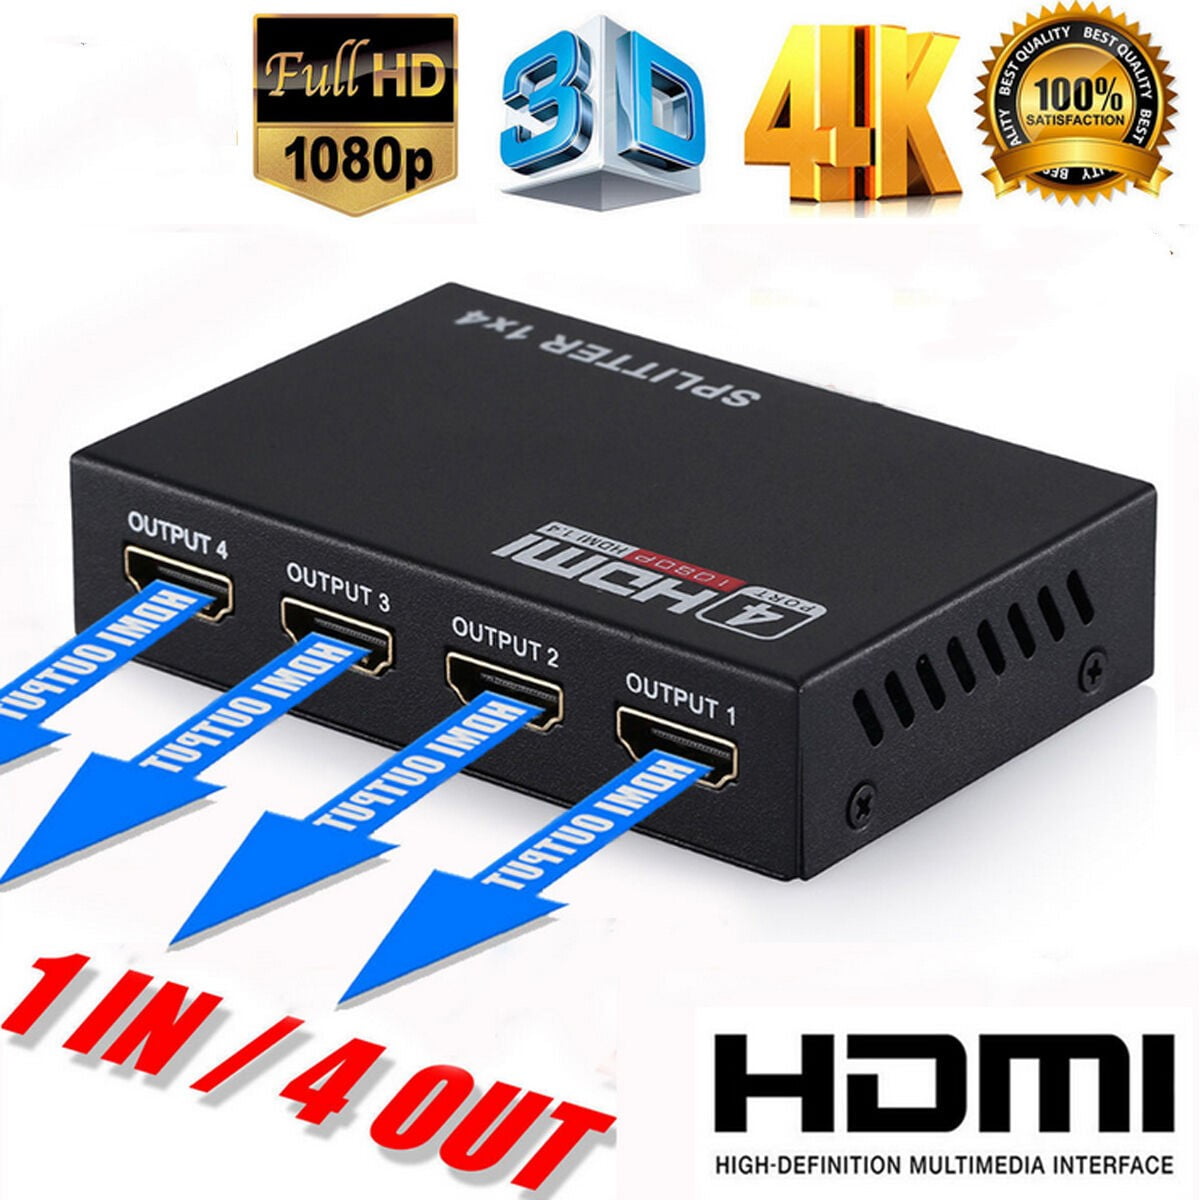 HDMI Splitter 1 in 3 4 Out,V1.4 Powered 1x4 Ports Box Supports 4K@30Hz Ultra HD 1080P and 3D Compatible PC STB Xbox PS4 PS3 Stick Roku Blu-Ray Player HDTV -